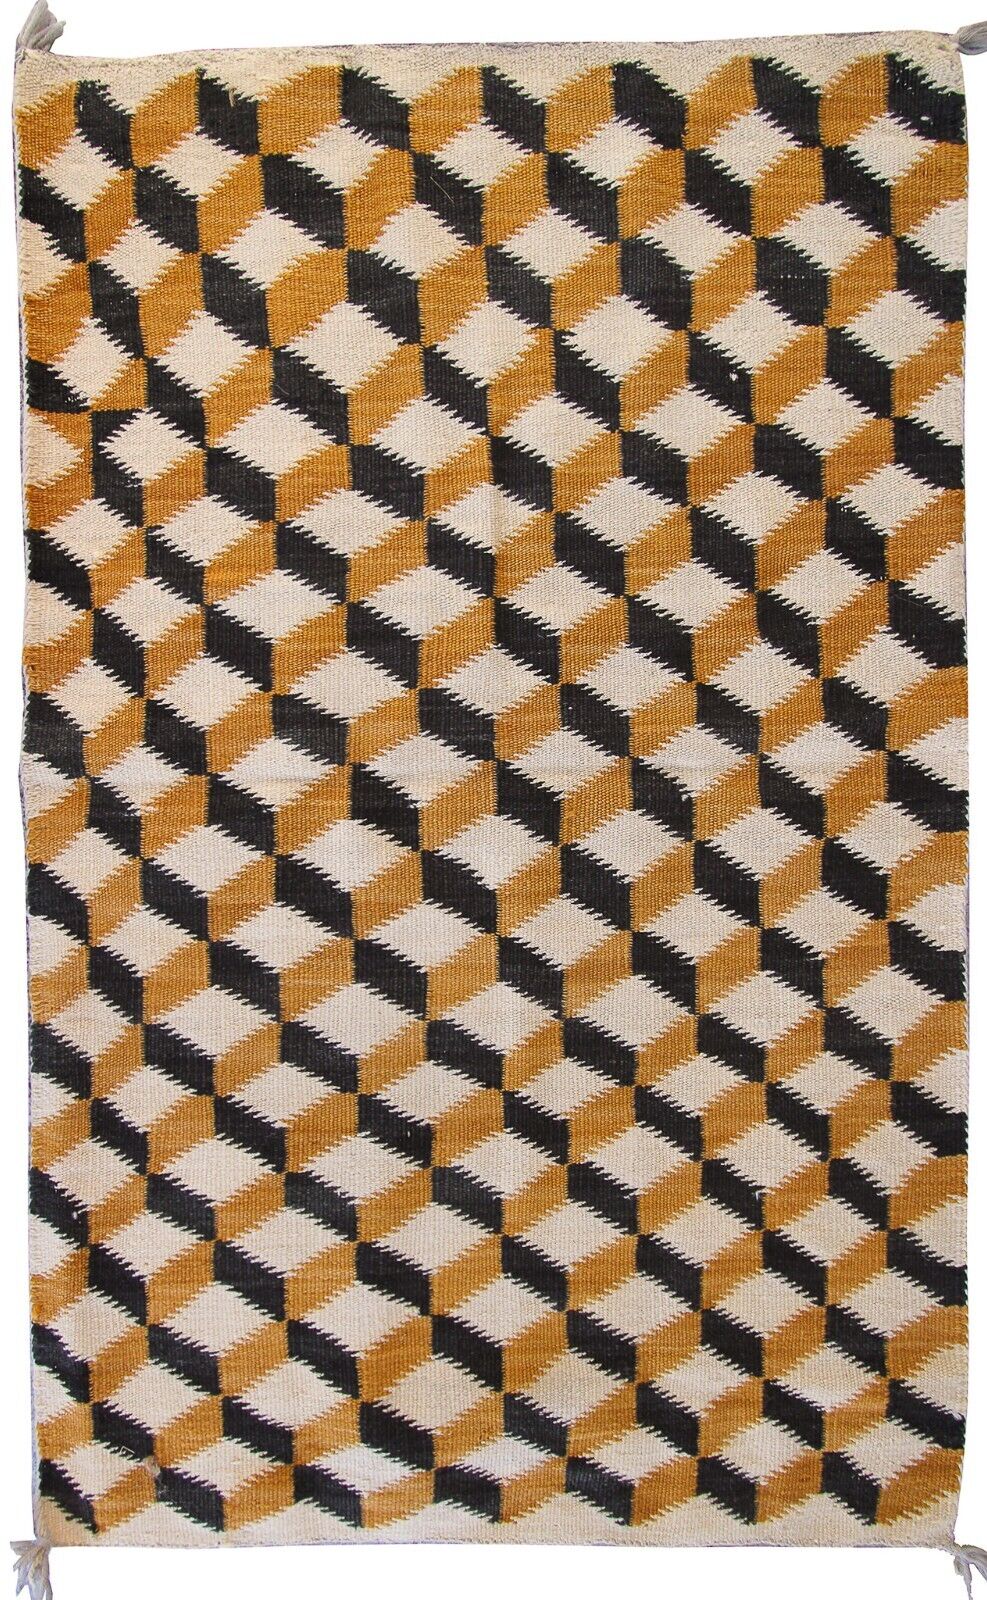 Antique Navajo Rug Flatwoven Geometric Optical Illusion Handwoven 2x3 Tapestry